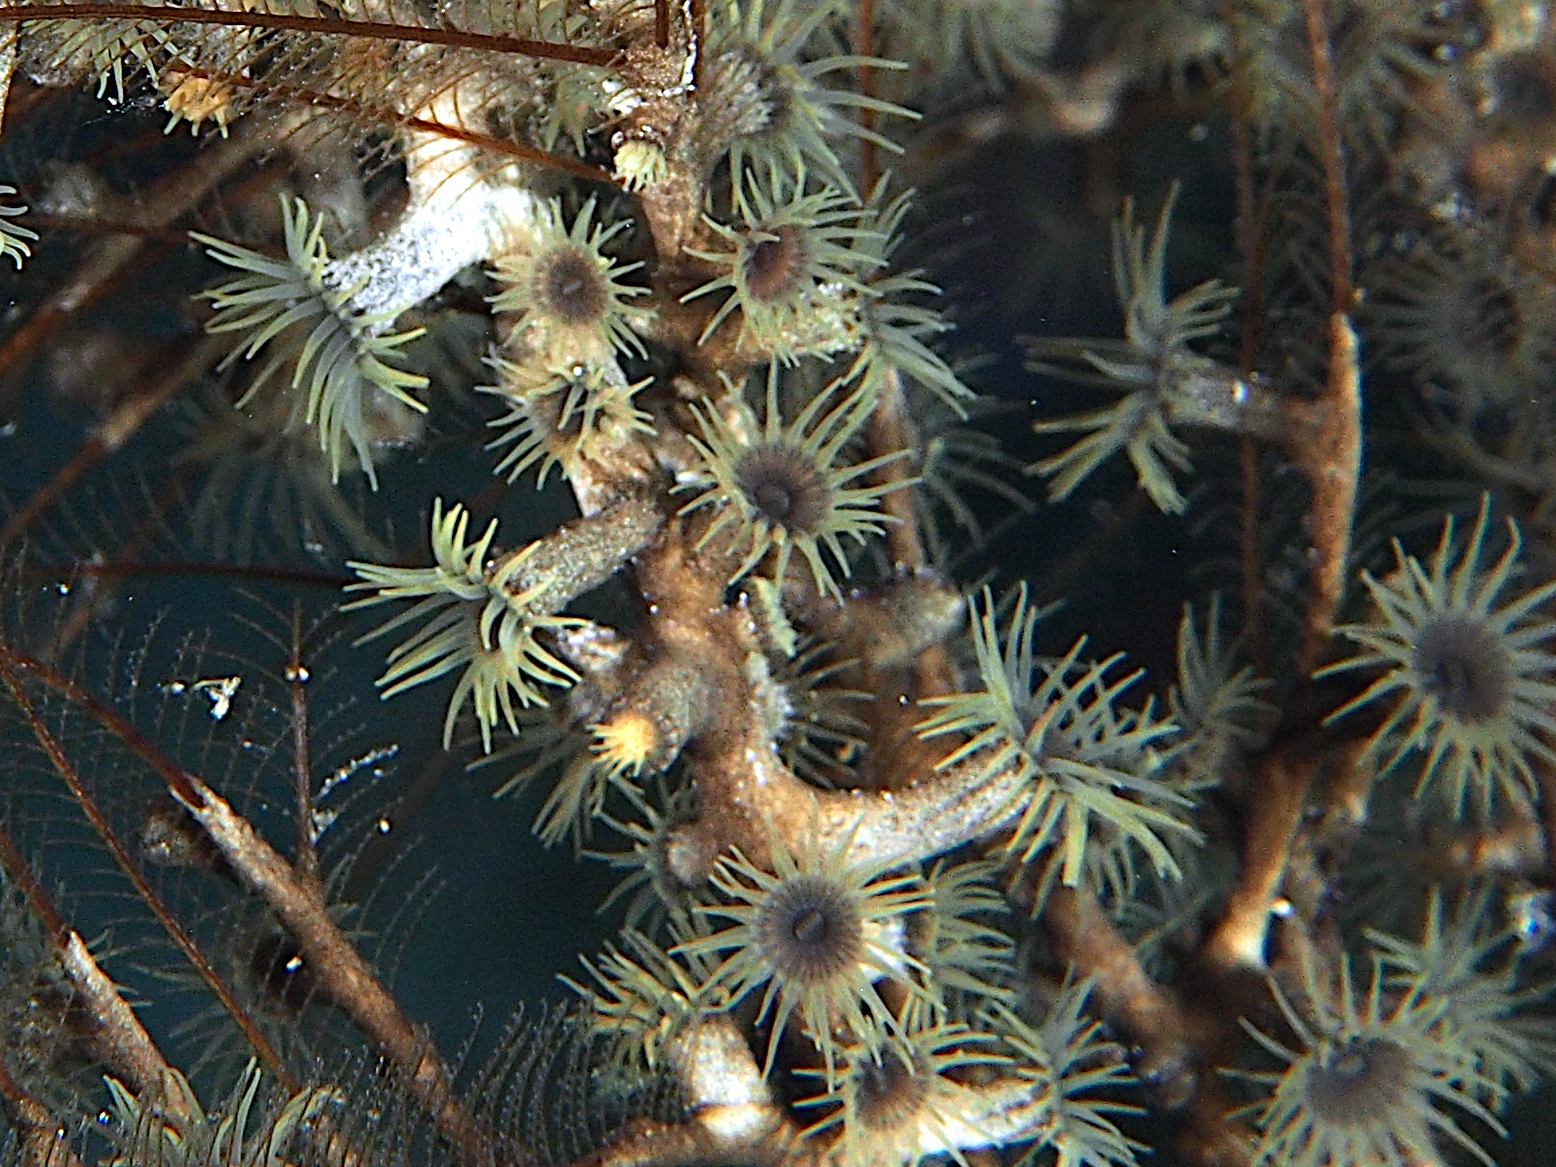 Hydroid Zoanthid - Hydrozoanthus tunicans - Cozumel, Mexico